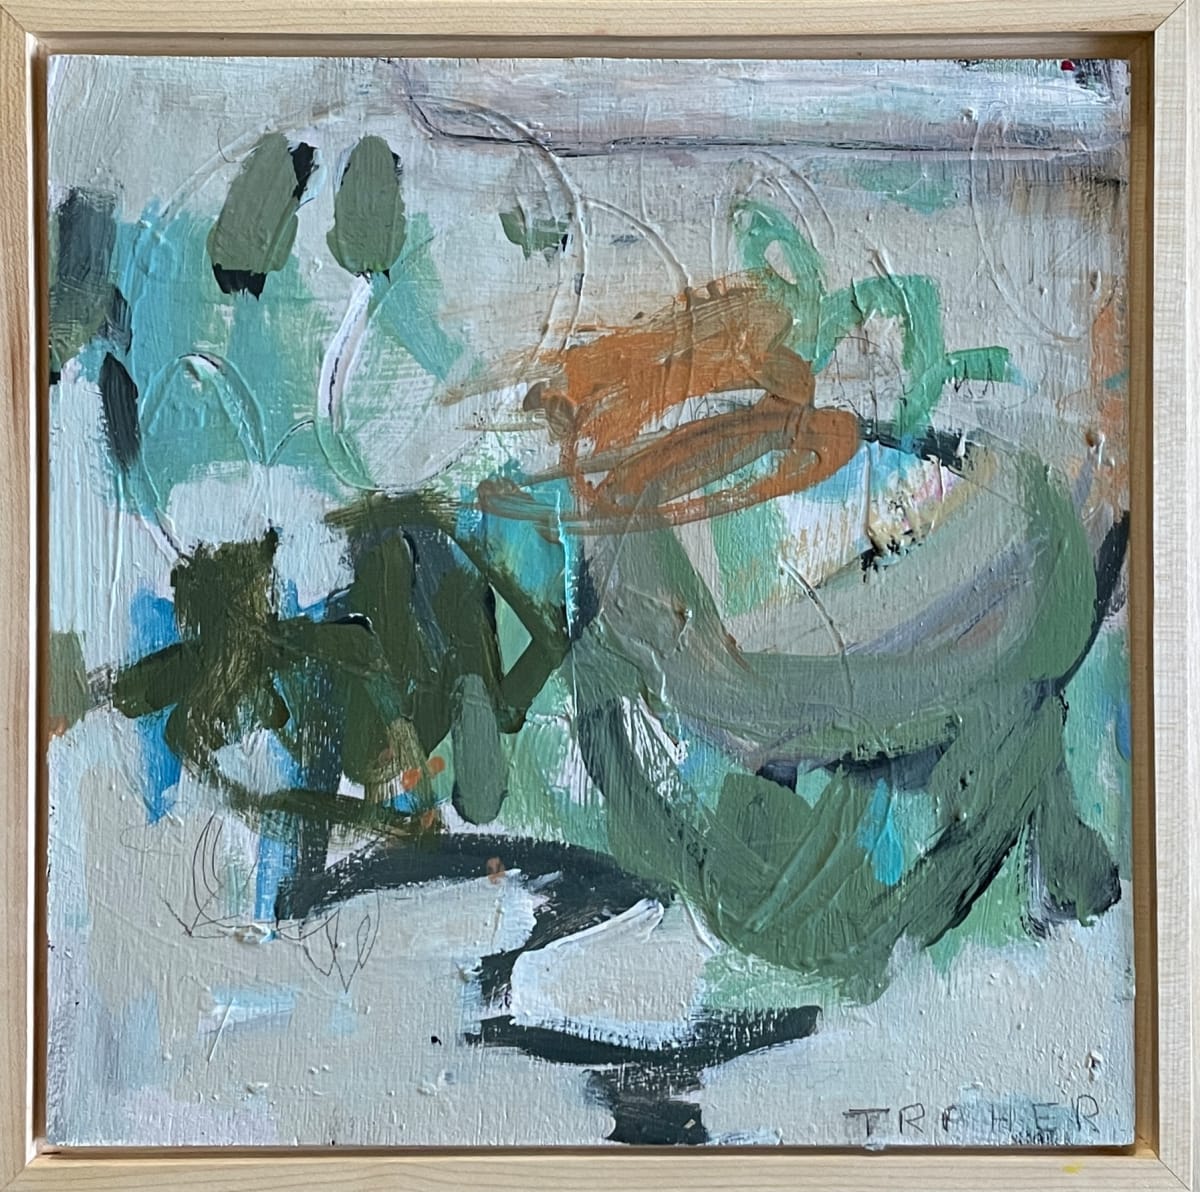 As Promises Go by Miriam Traher  Image: Bring life to your walls, creating your SQUARE FOOT gallery. All pieces are 12 "x 12", excluding the frame and can be mixed and mingled to create your unique expression in your home. A grouped exhibition makes a visual architectural and sculptural work dynamic and fluid as your tastes change. The size remains the same, and the frame remains the same.  Build on it, rearrange it and express your unique taste and style. Need to spice up a space? Change the pieces, move them to a new location, mix their order, buy a new one, and create a new wall of awesomeness. Created on birch rigid wood board and set in a 1.5" beautiful maple frame. Neutral and modern. Check back often for new and exciting additions to add to your wall of awesomeness.

* ORIGINAL ARTWORK
* set in a 1.5” natural maple drop frame
* birch wood panel
* wired and ready to be hung 
* 12”x12”
* mixed media, acrylic paint, collage, graphite, sgraffito, fancy word for scratchy marks, paper and other sundries

All small works ship for free in Canada and the continental United States. International shipments, no problem. Drop me a quick email; I would happily quote the shipping charge. If you are unsure, questioning, or need some guidance on picking a piece or grouping of pieces, I can help you. Drop me a line, and we can arrange a call or video call or do some room mock-ups.

Still have questions? Want to arrange a direct pick-up? I would love to help and can always be reached at miriamtraher@icloud.com. Let's wrap up your favourite piece and have it off to its new home to bring your unique expression to life.
